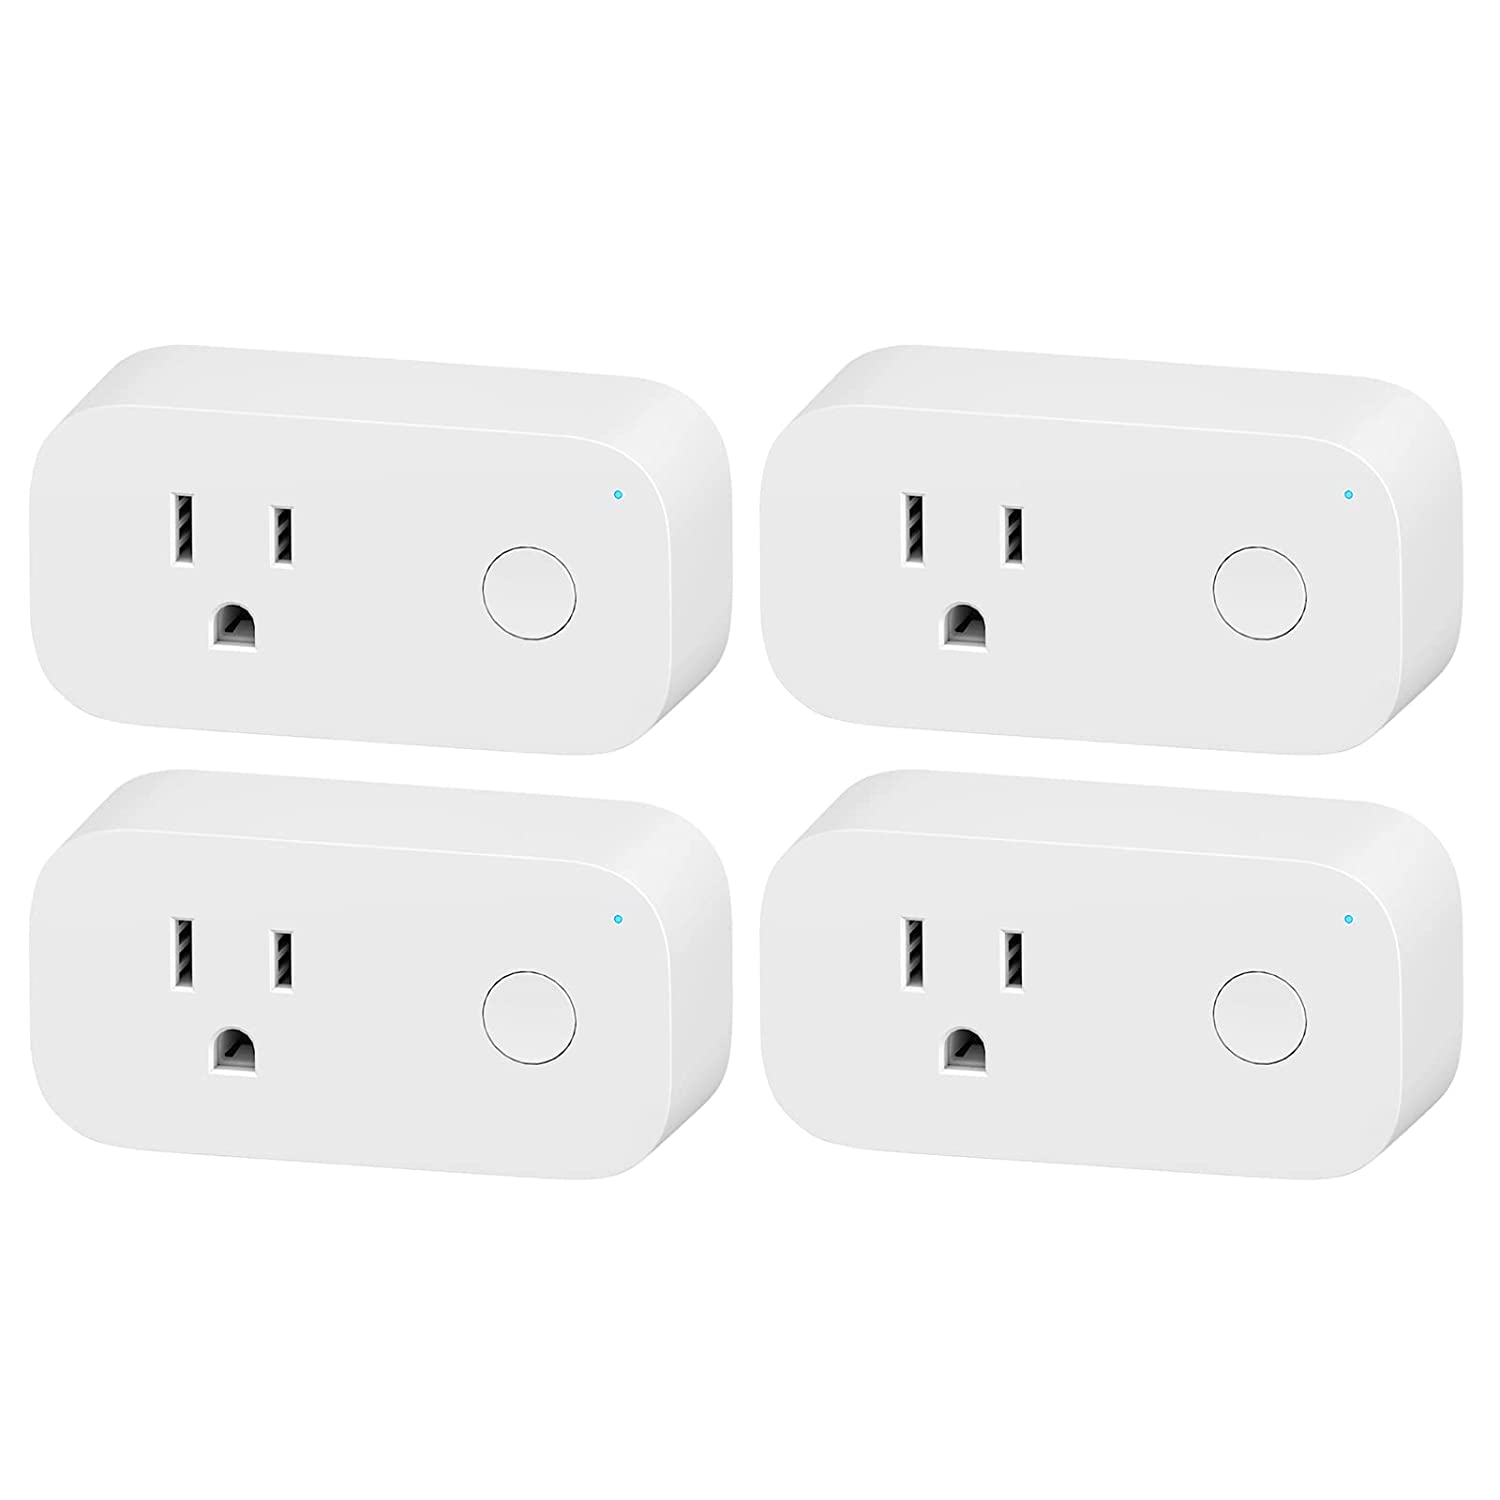 BN-LINK Smart Wi-Fi Plug Outlet, Remote Control by App, Compatible with  Alexa and Google Assistant, Weatherproof, Requires 2.4 GHz Wi-Fi, ETL Listed